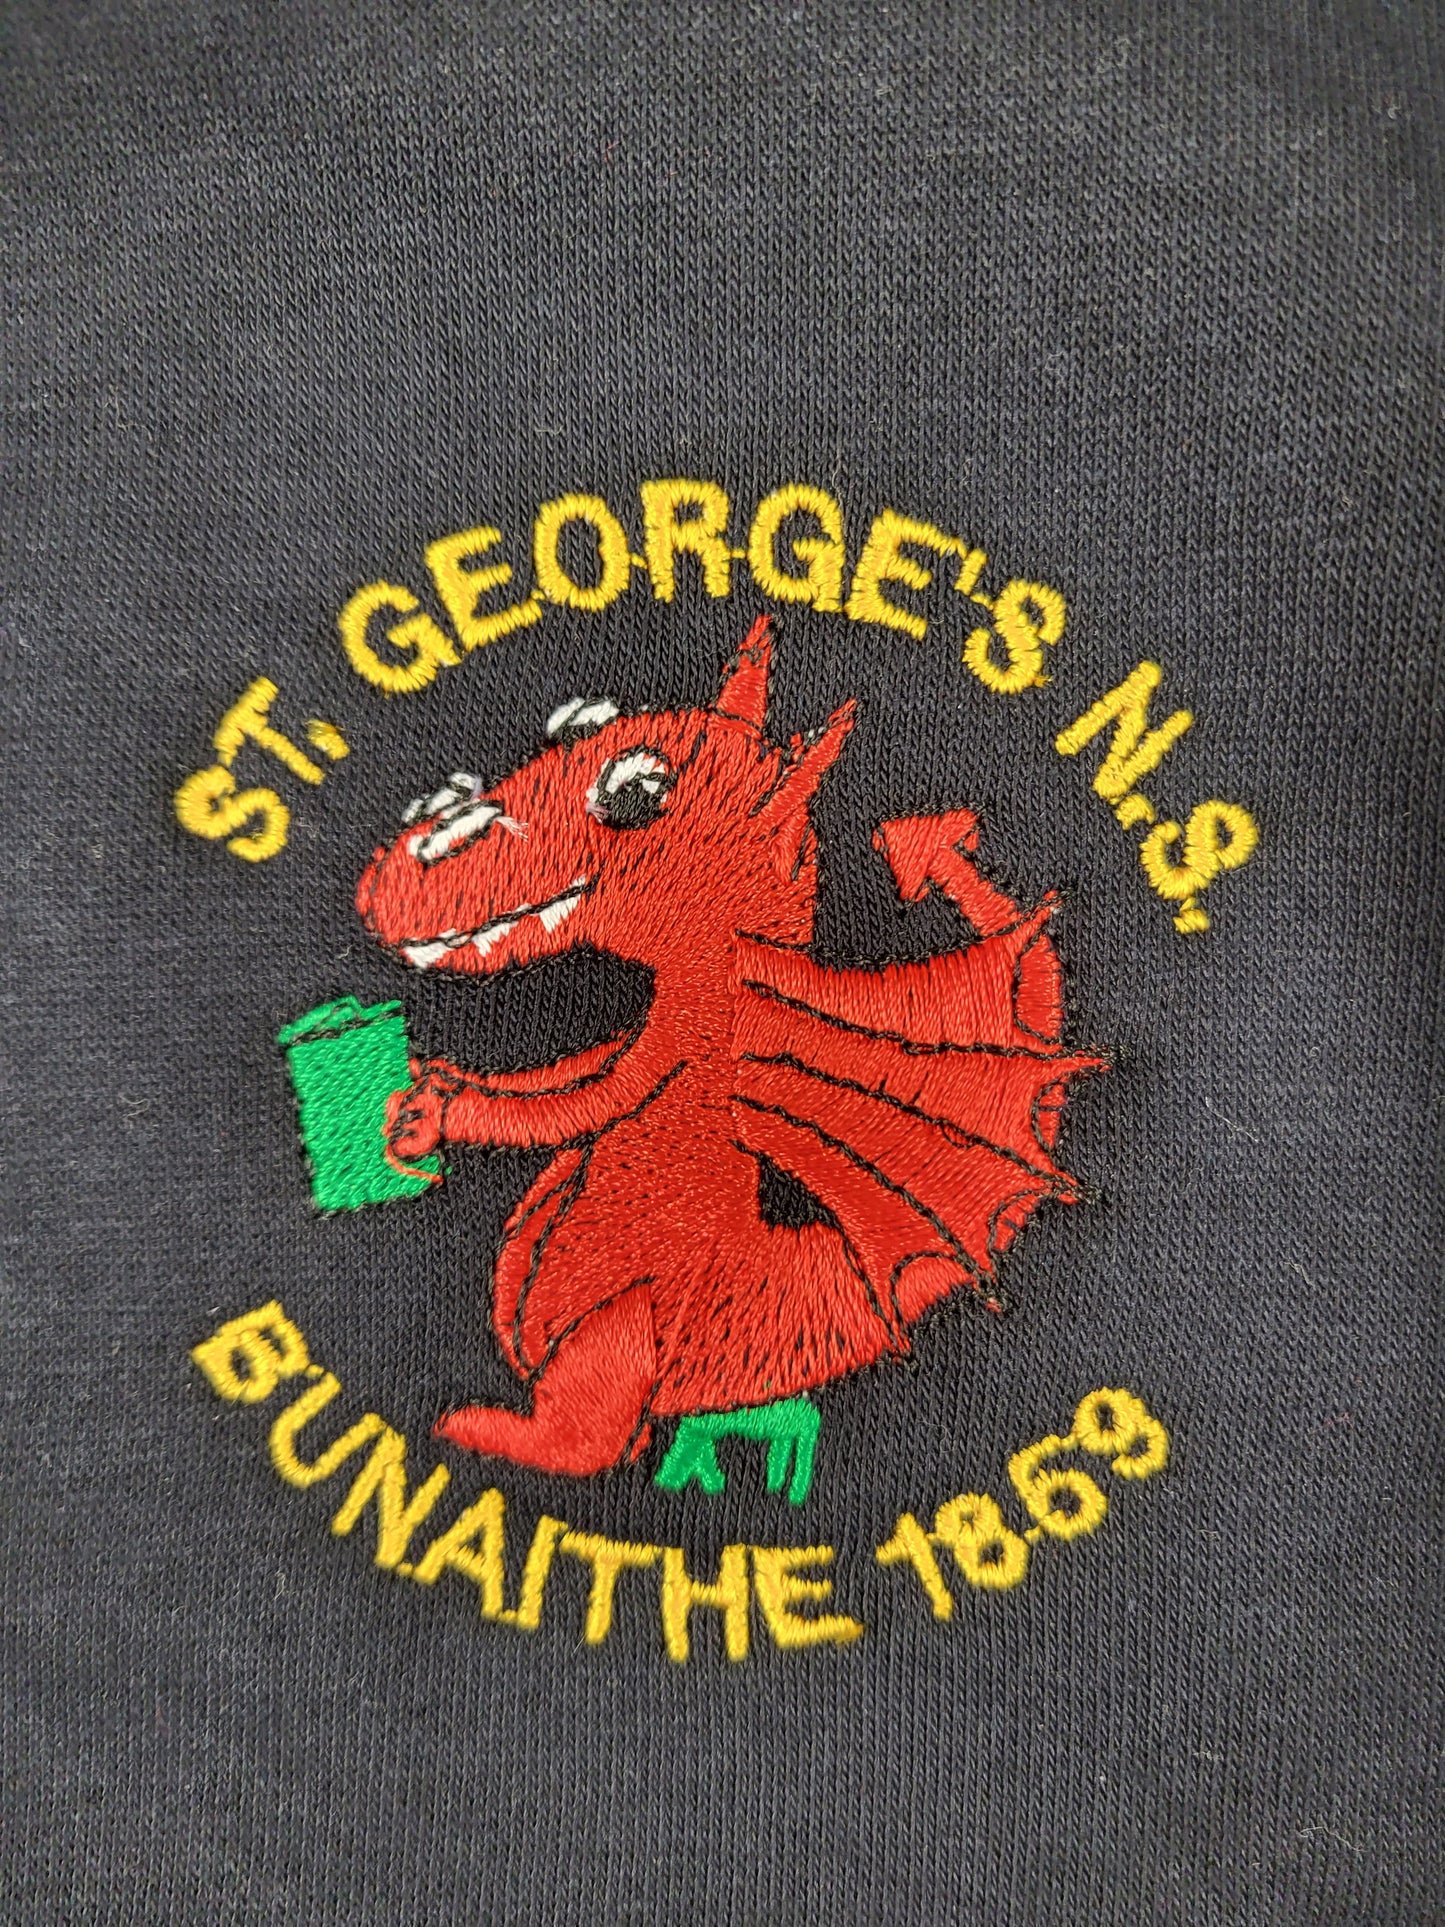 ST GEORGES NS TRACKSUIT TOP